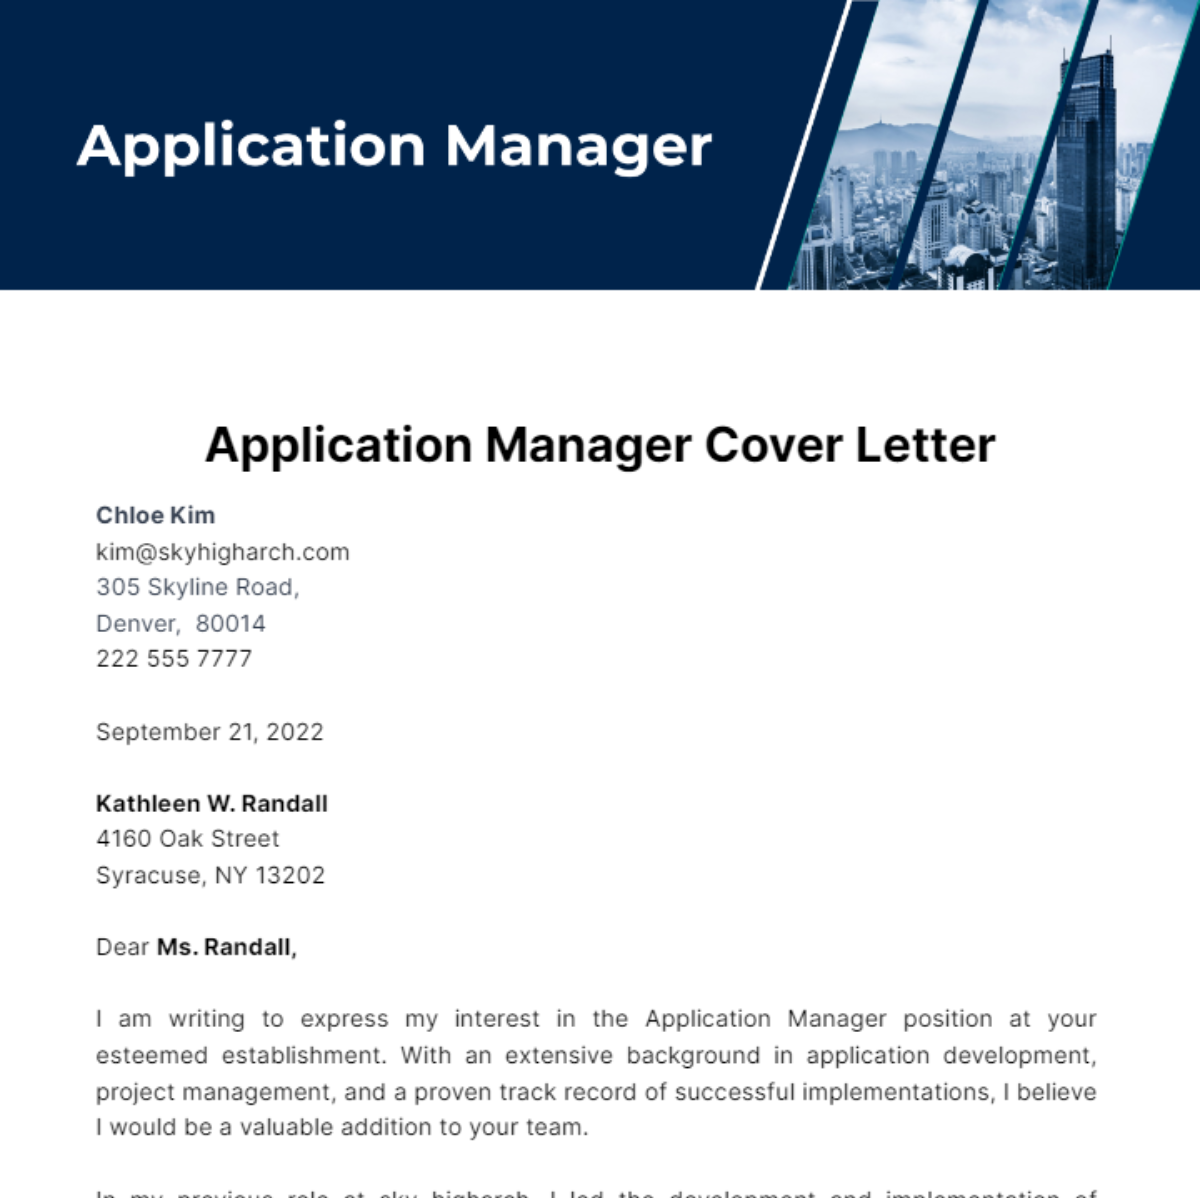 Application Manager Cover Letter Template